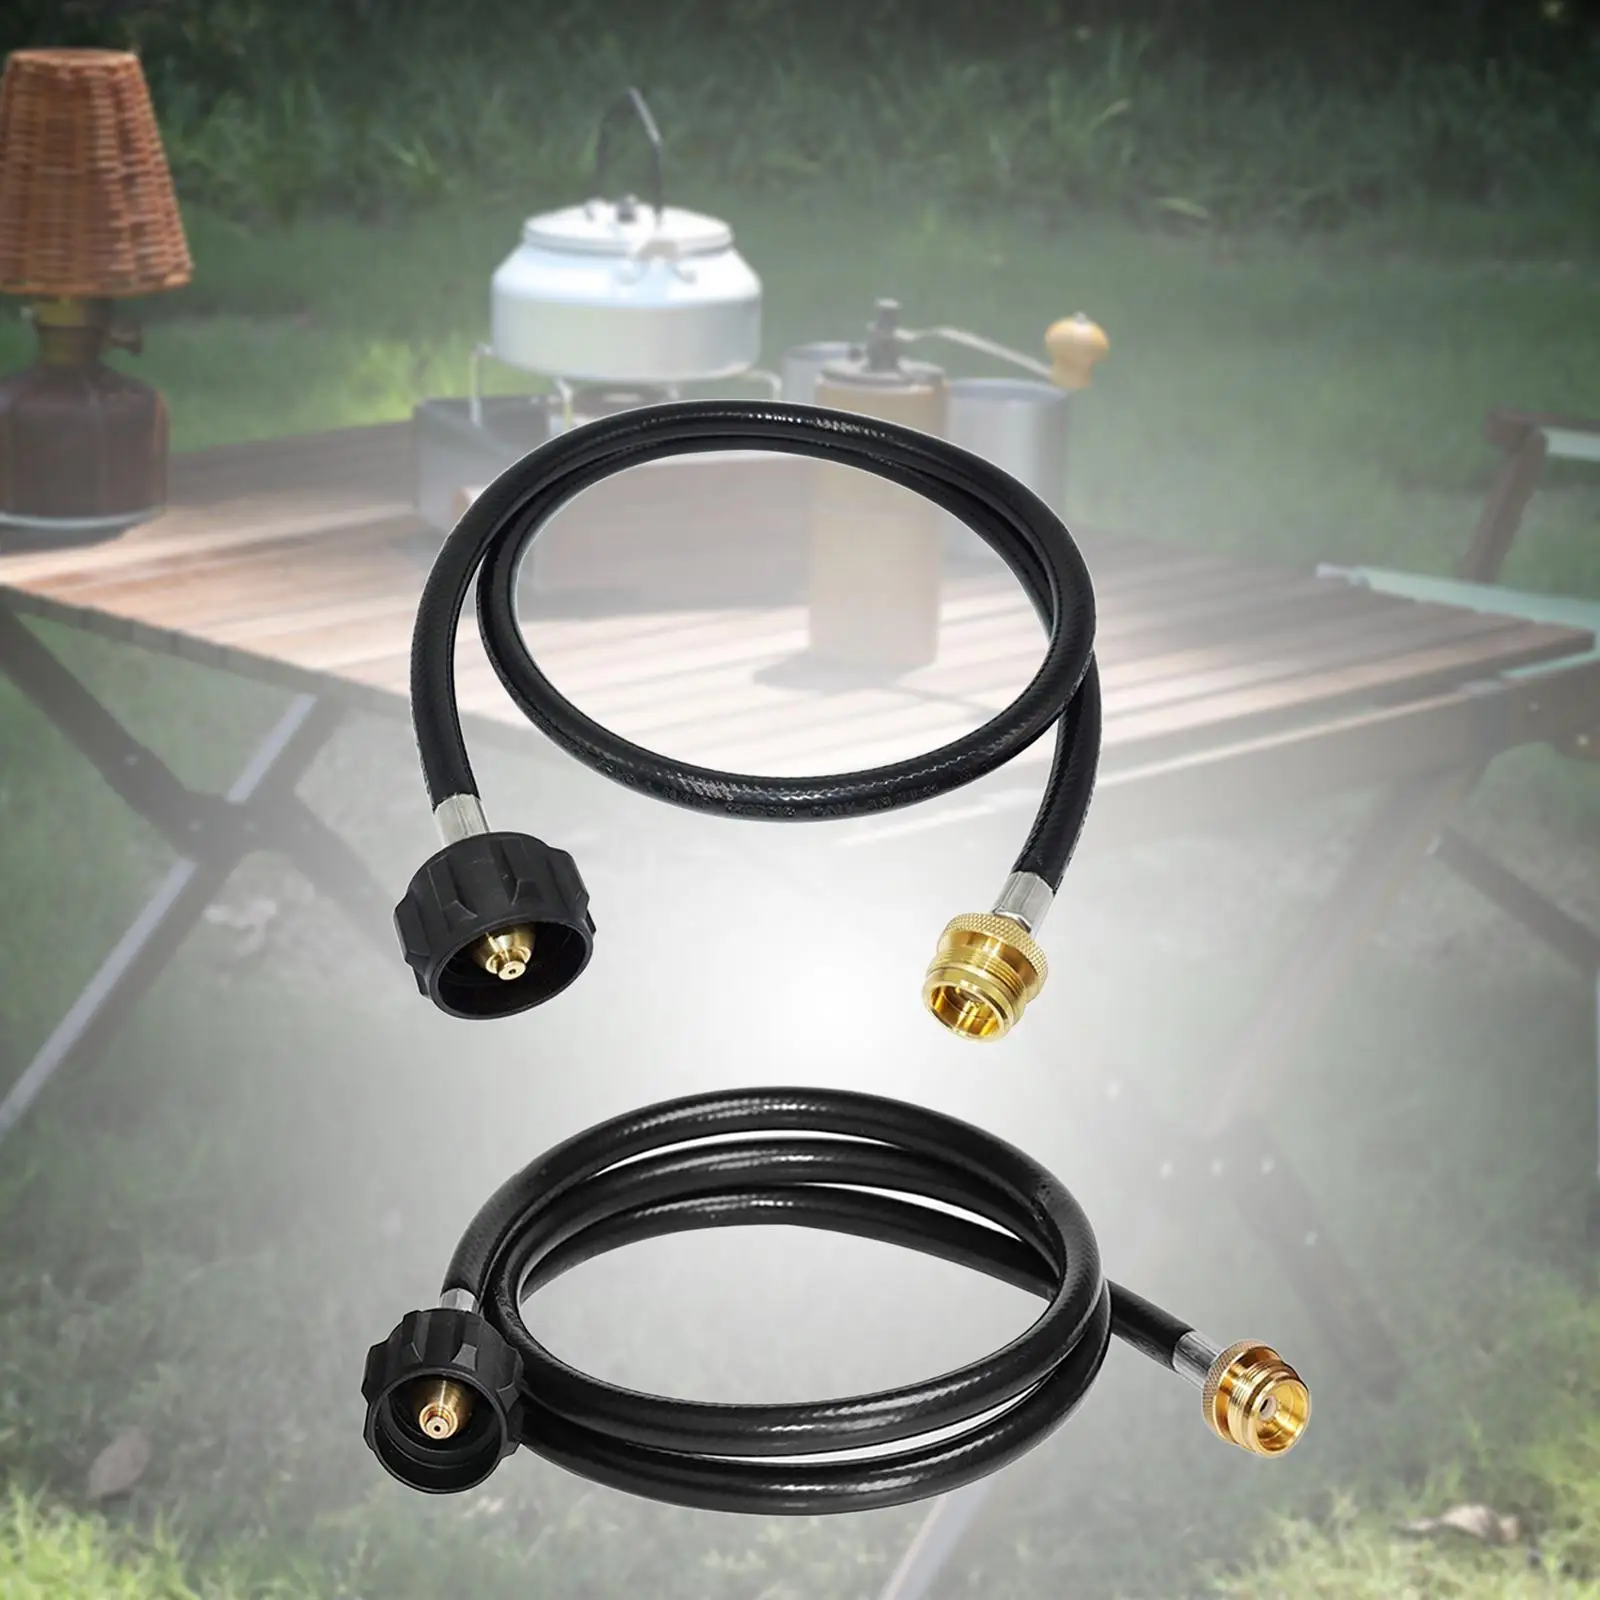 Propane Adapter Hose Portable Canister Converter Flat Tank Coupler Propane Tank Hose for Outdoor Hiking Picnic Cooking Barbecue